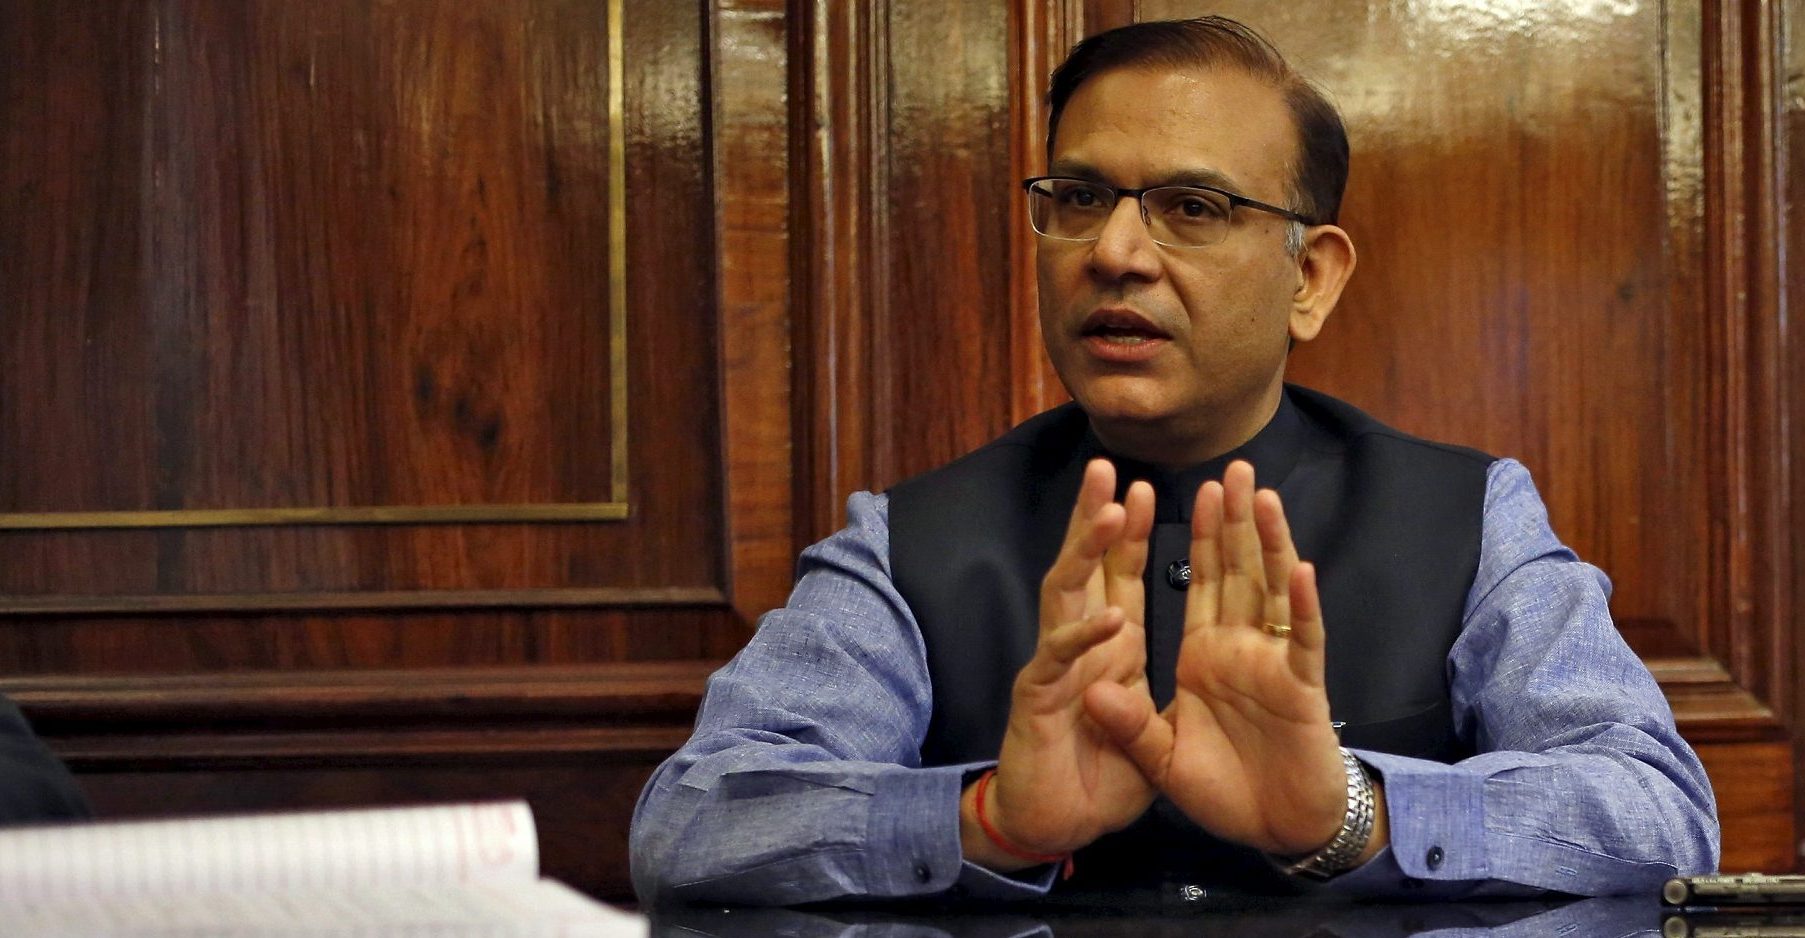 India's Junior Finance Minister Jayant Sinha gestures during an interview with Reuters in New Delhi, India, April 27, 2015. India will not take away the Reserve Bank of India's (RBI) power to regulate trade in government bonds even as it prepares to remove the central bank's responsibility for managing public debt, Sinha told Reuters in an interview. Picture taken April 27, 2015. REUTERS/Anindito Mukherjee - GF10000075747